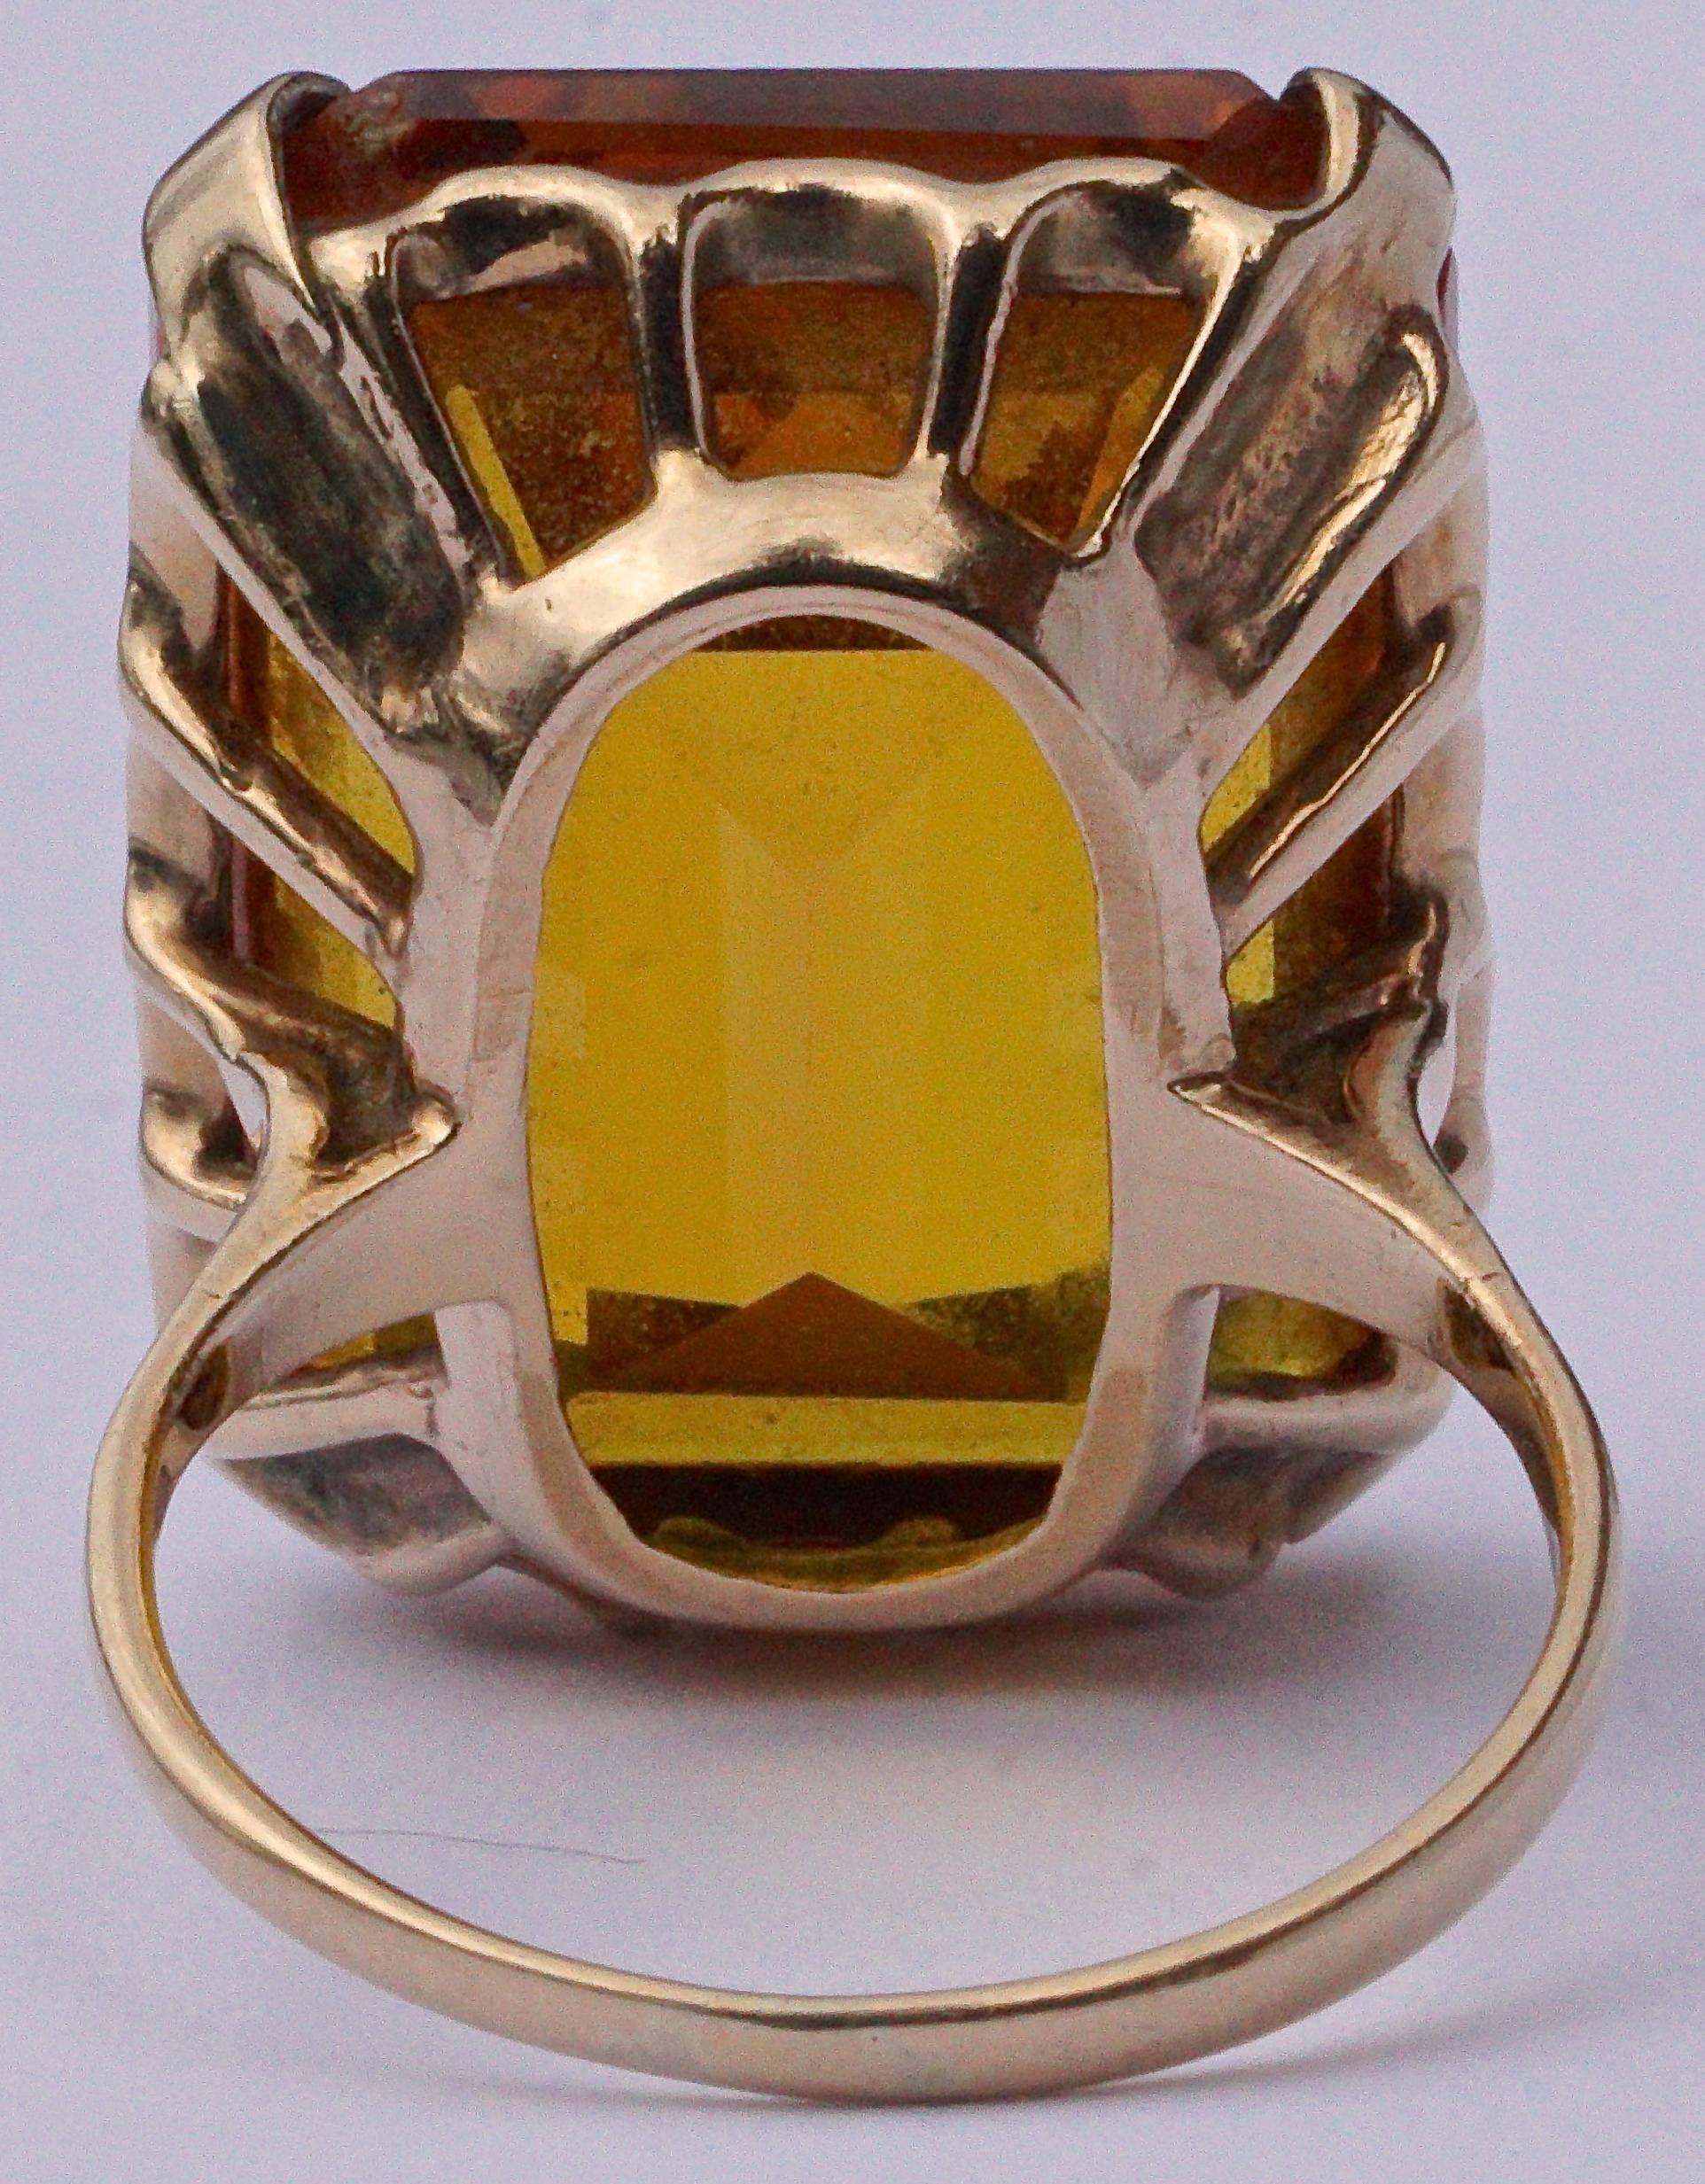 Fabulous 9ct gold ring with a large emerald cut synthetic sapphire, ring size UK K, US 5 1/4, inside diameter 1.6cm / .6 inch. The beautiful burnt orange synthetic sapphire measures 2.1cm / .8 inch by 1.6cm / .6 inch, and is held with claws in a